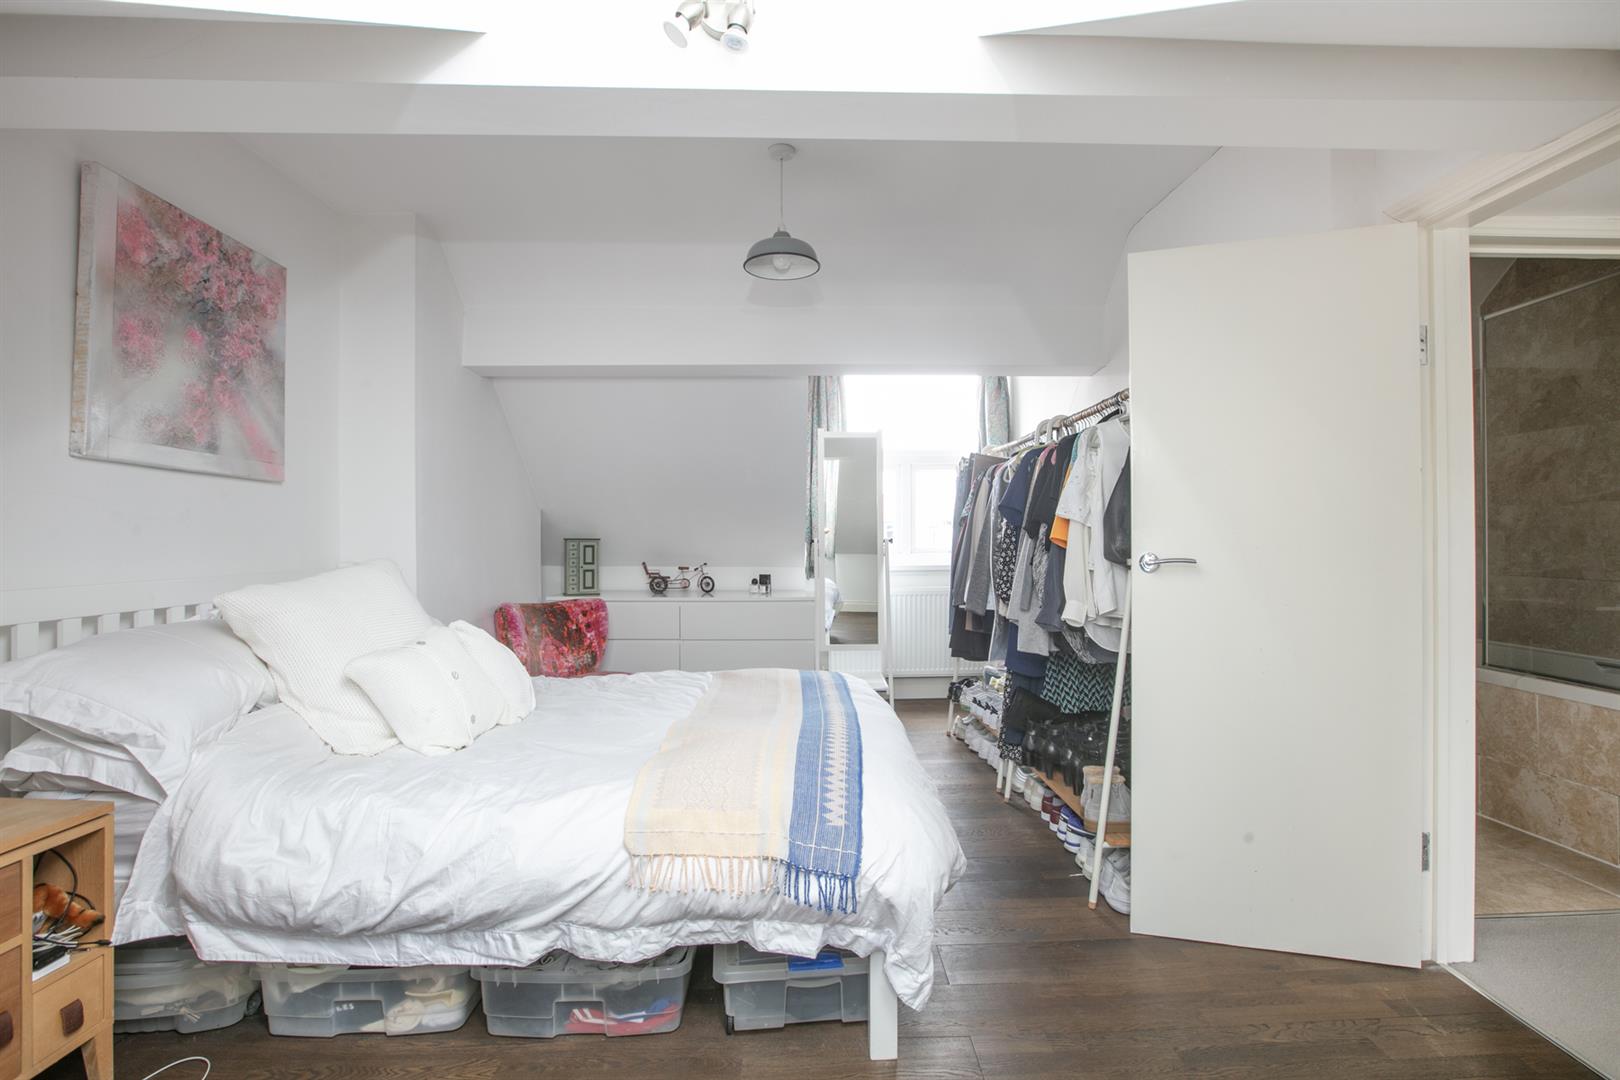 Flat - Conversion For Sale in Coldharbour Lane, Camberwell, SE5 1178 view11